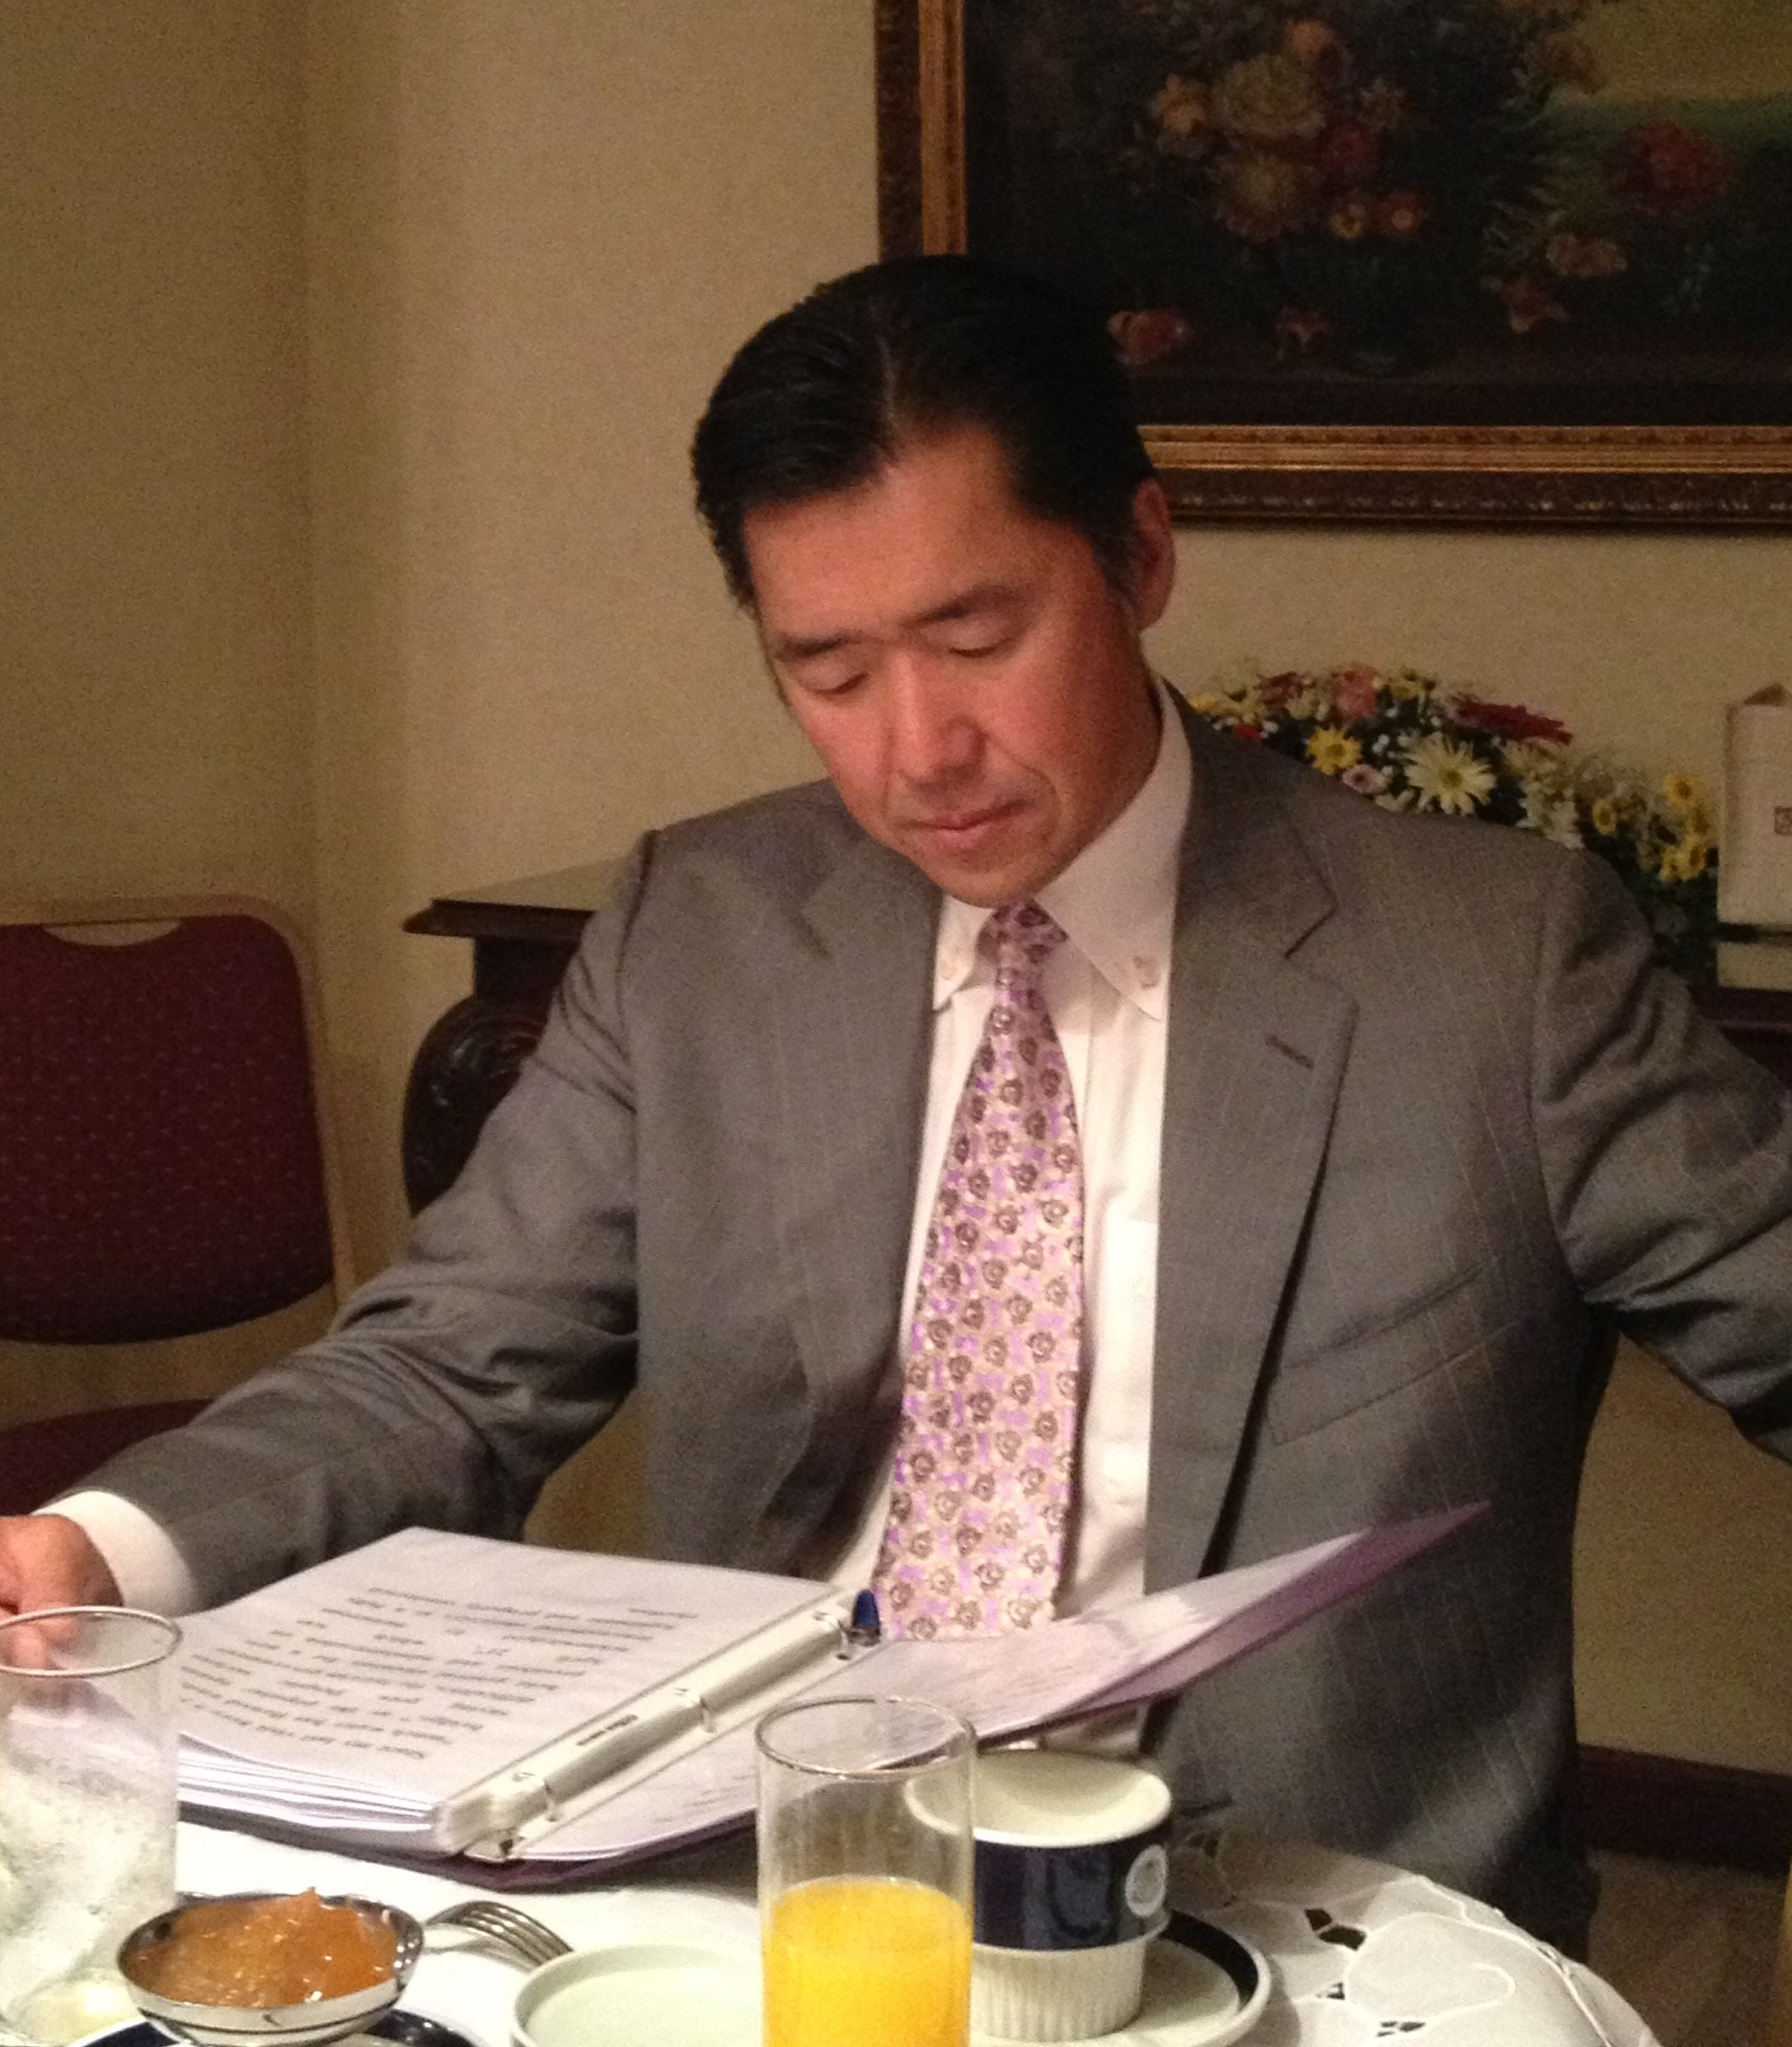 "Dr. Moon reviewing his speech prior to the opening plenary of the international conference on Governance, Ethics and Development."